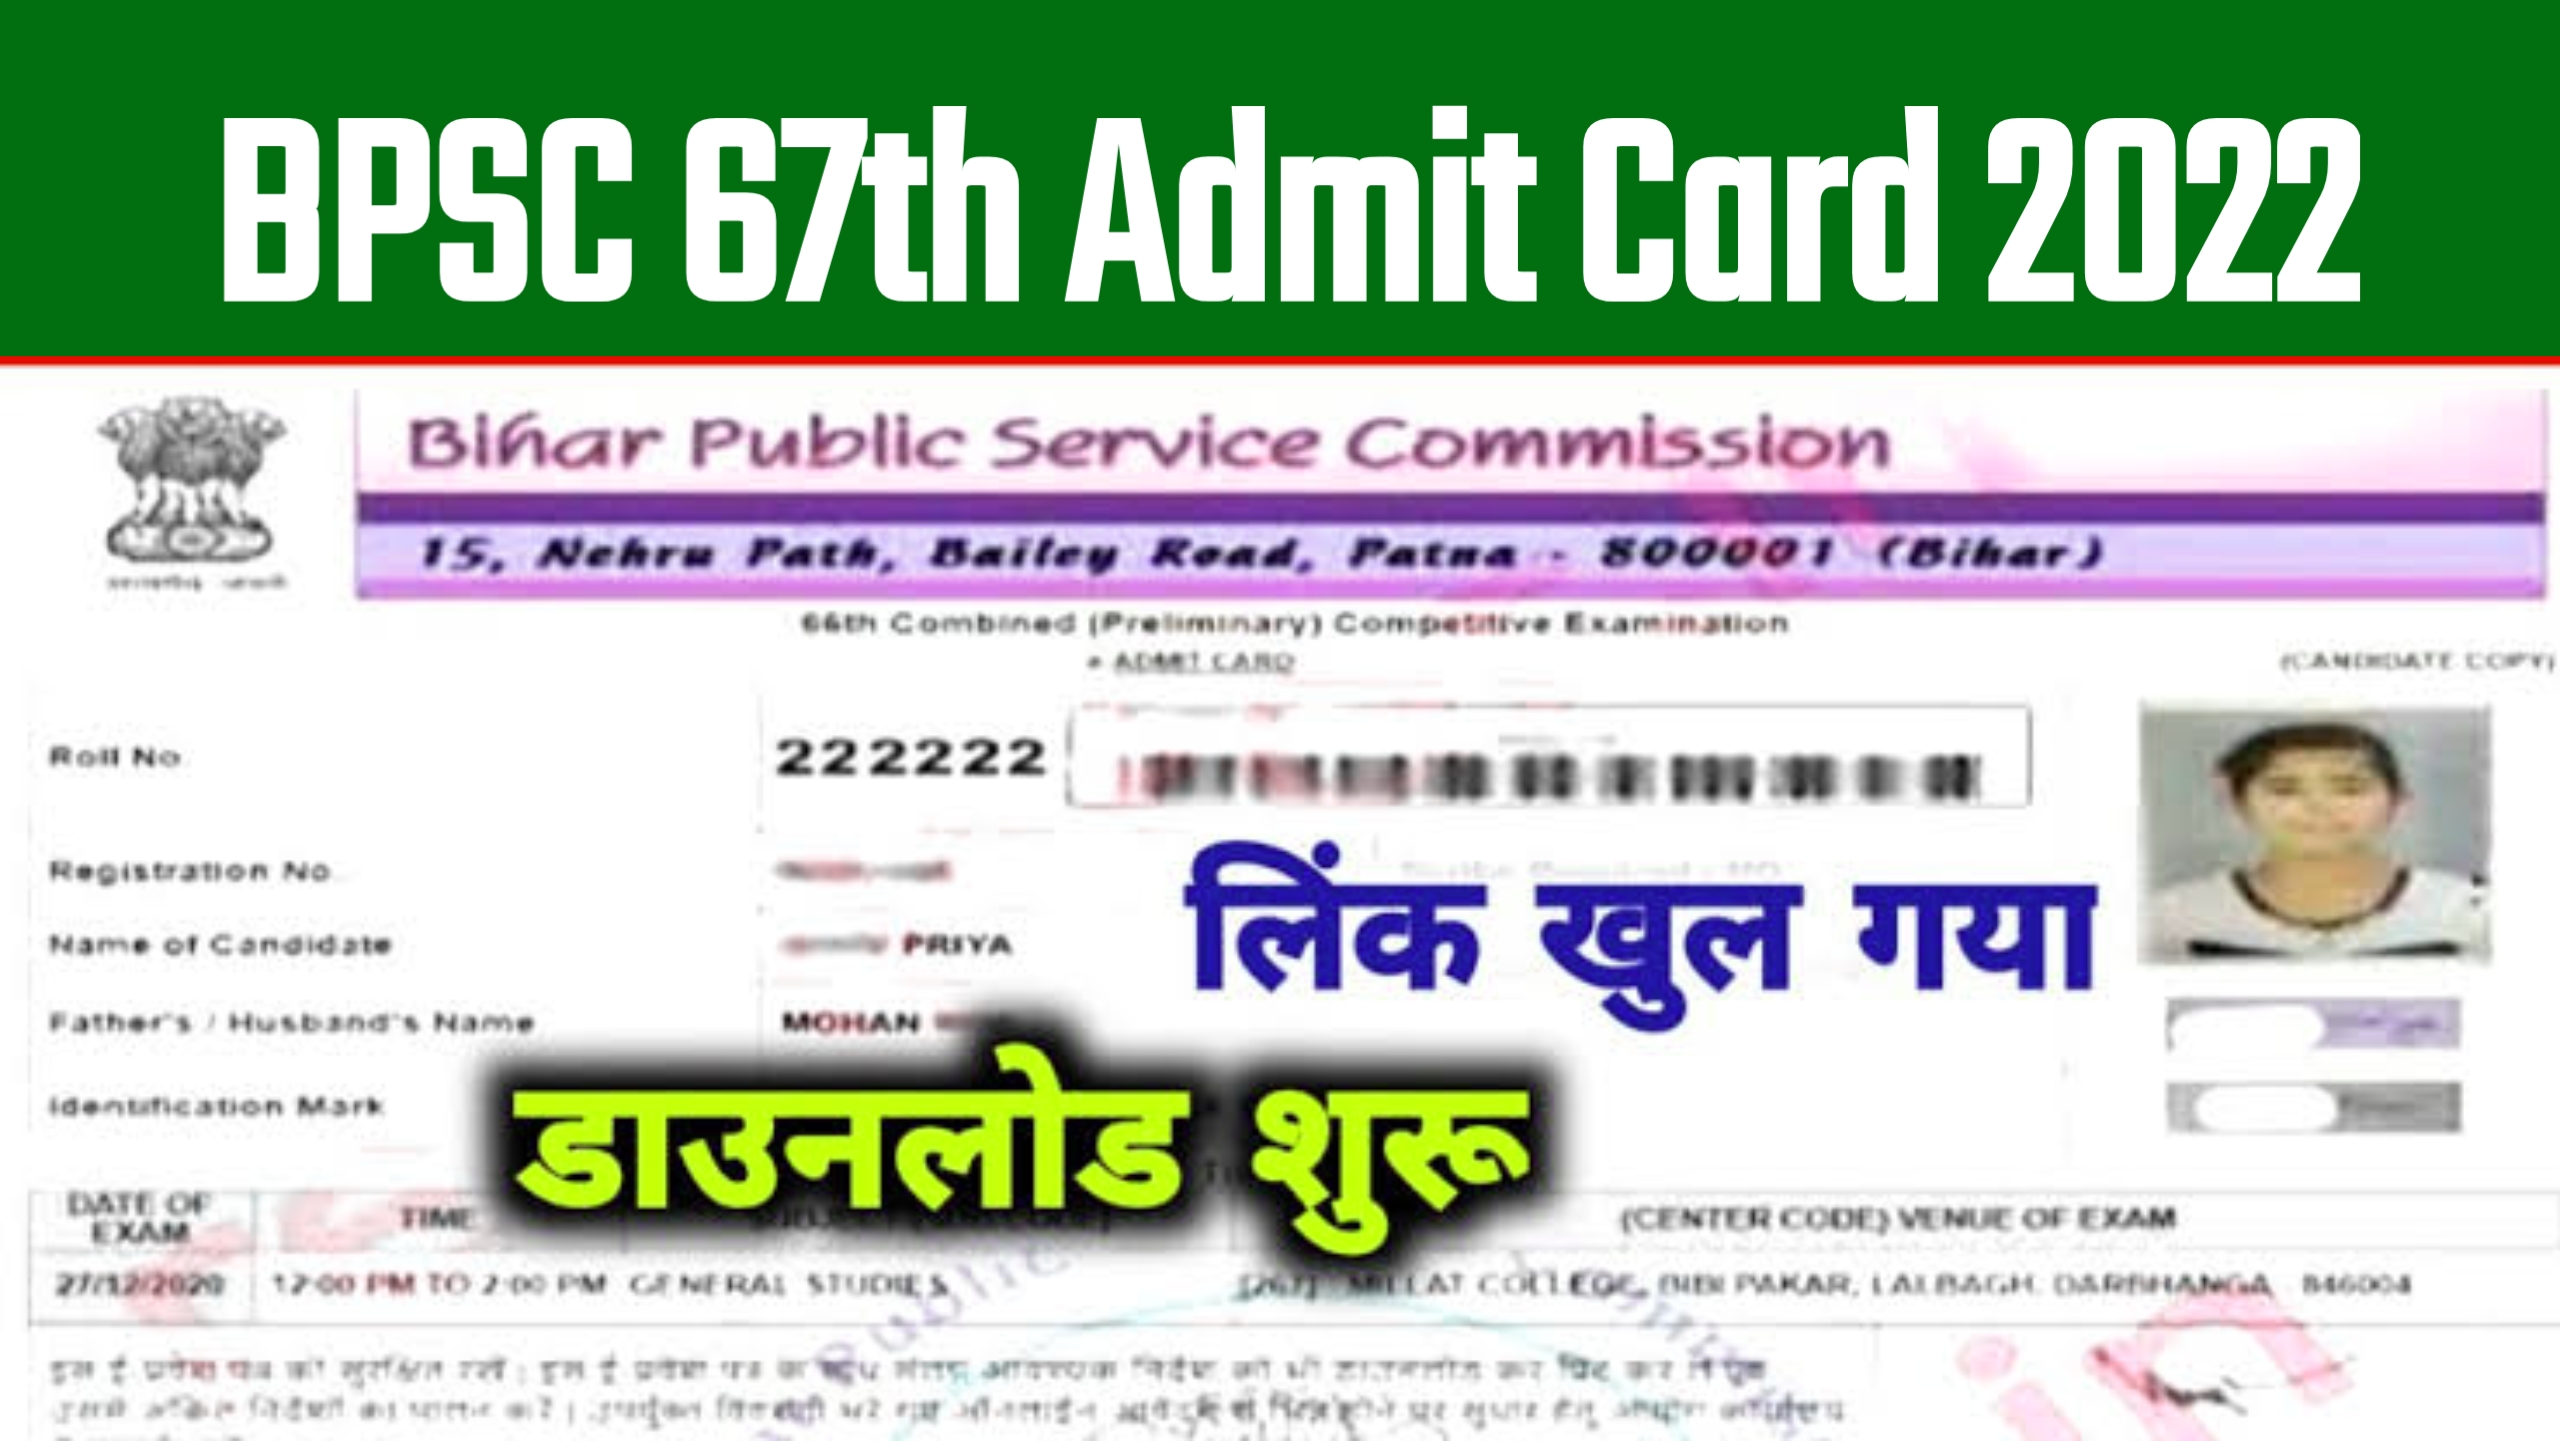 Bpsc 67th Admit Card 2022 Download Link @bpsc.bih.nic.in Admit Card 2022